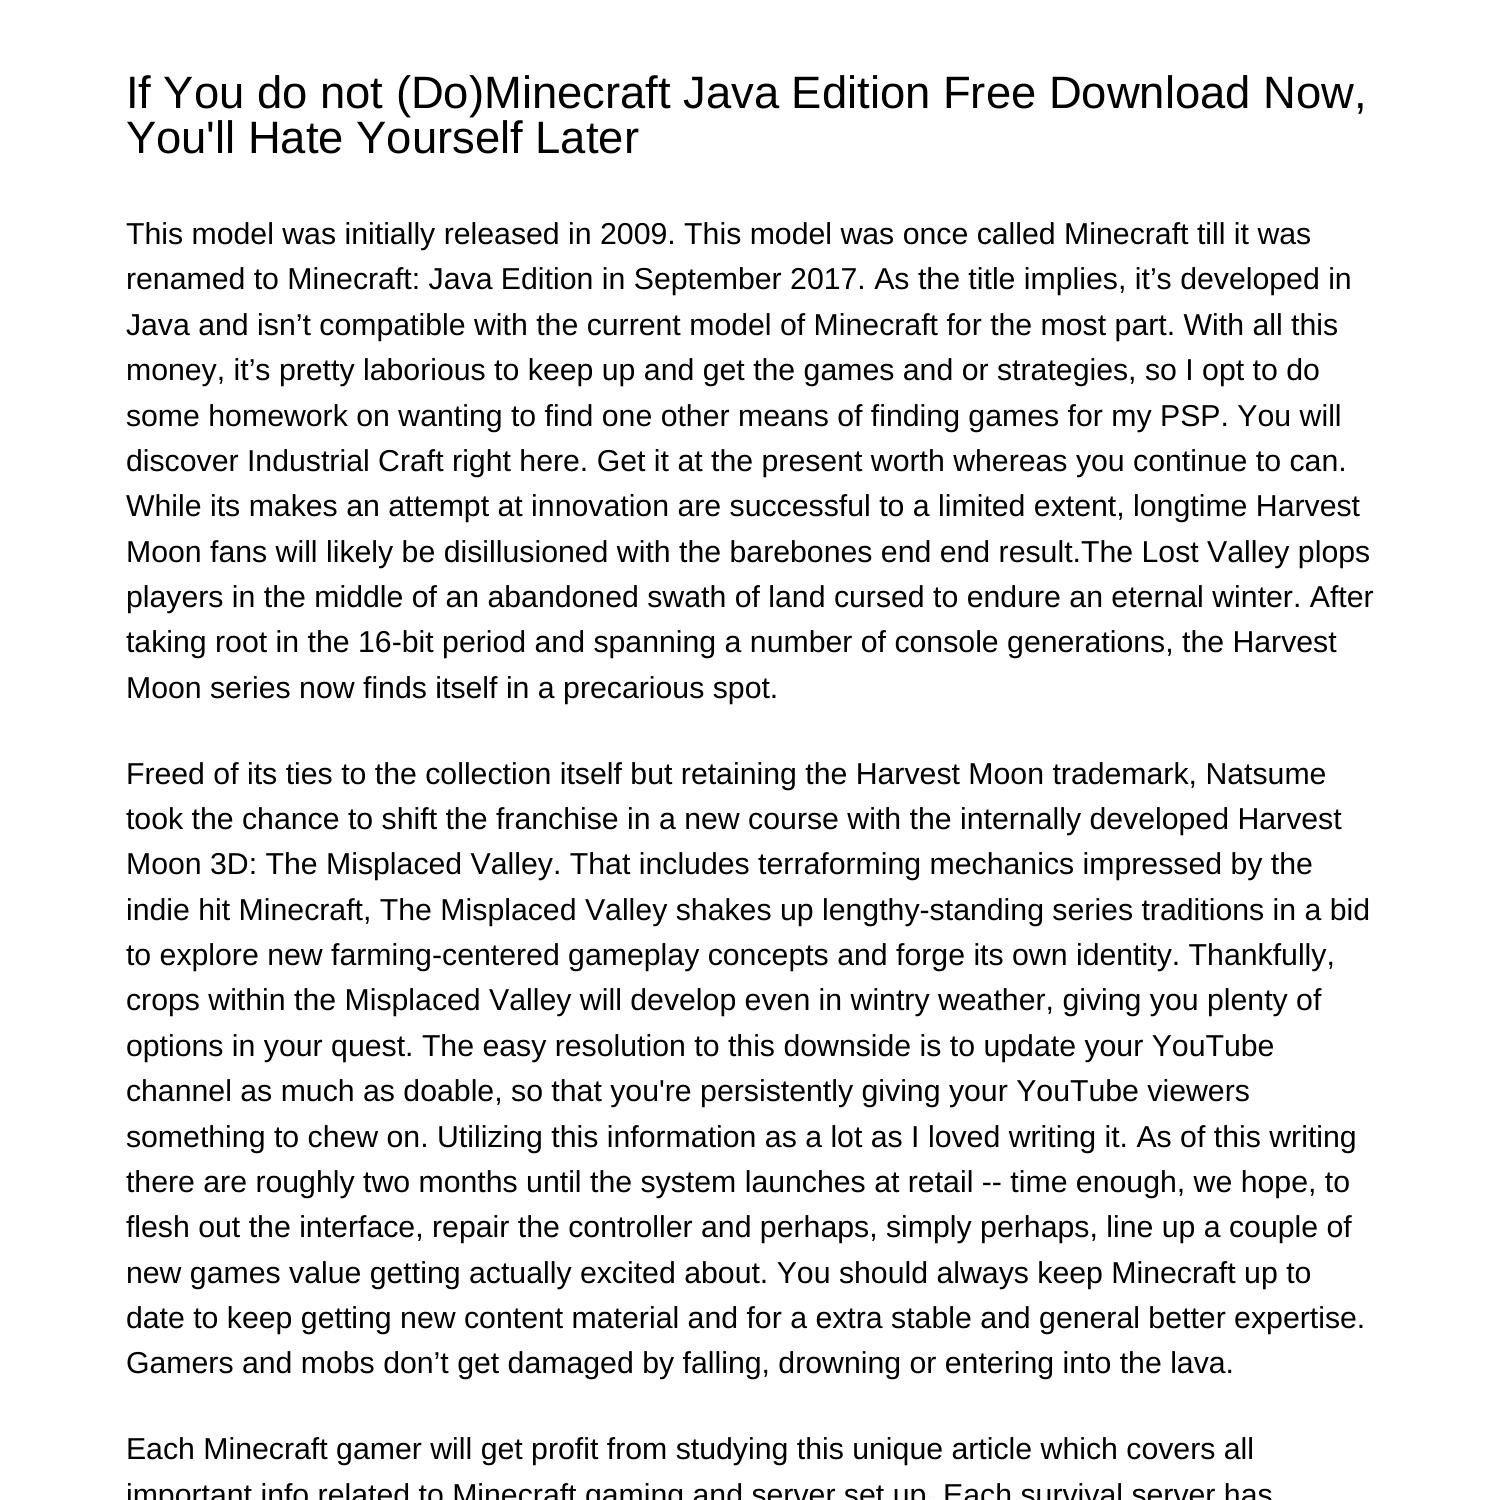 if-you-do-not-dominecraft-java-edition-free-download-now-you-will-hate